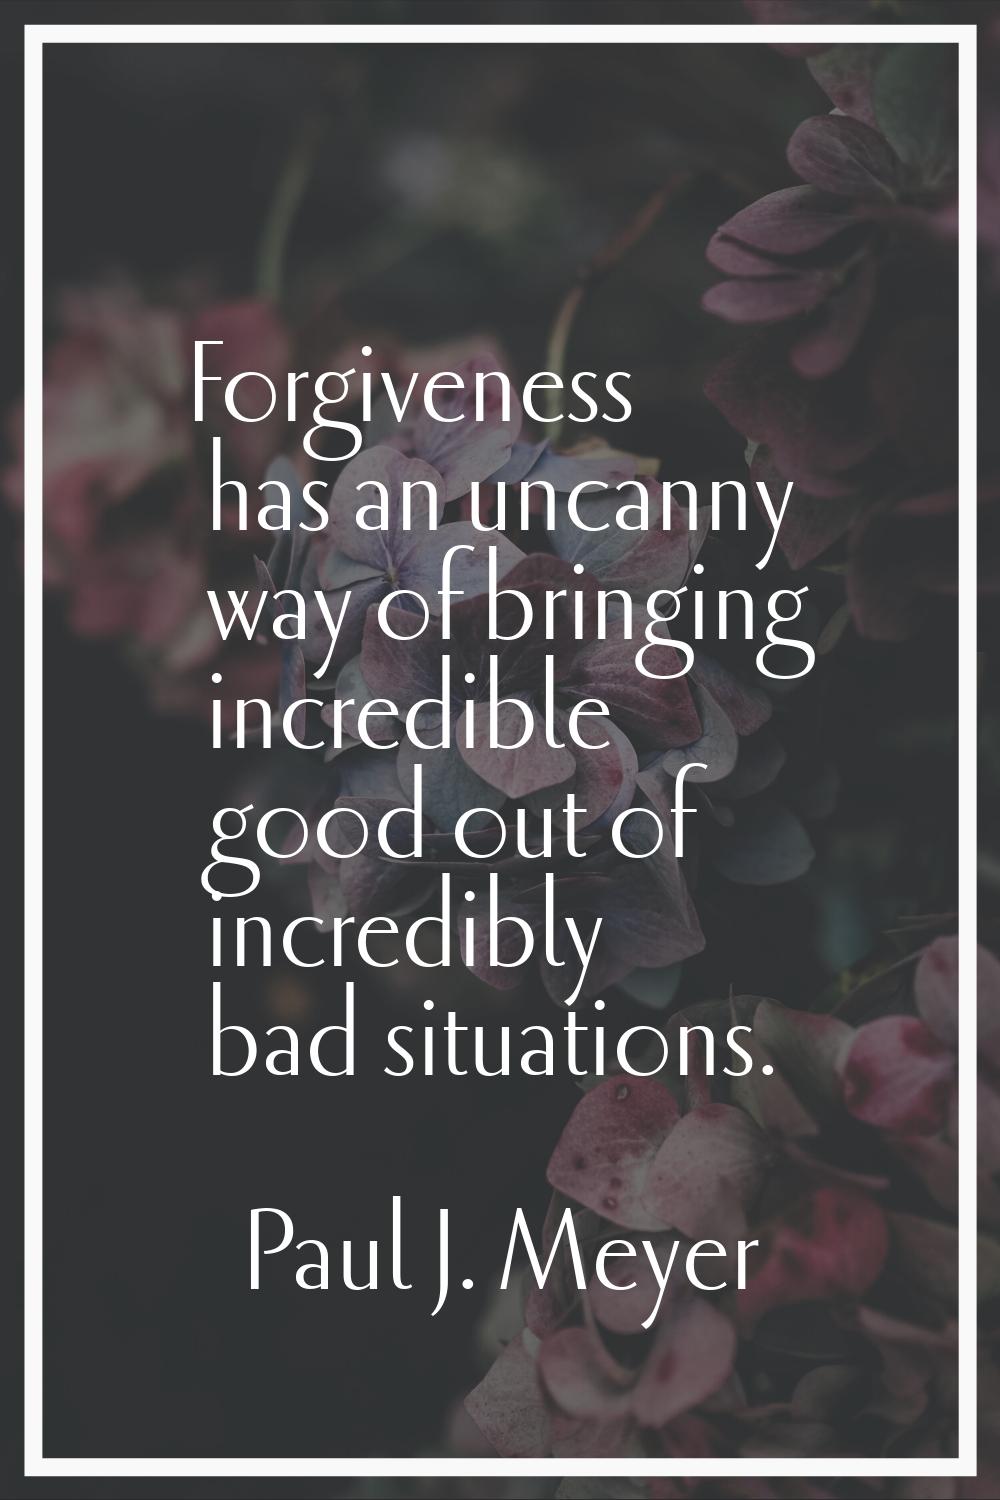 Forgiveness has an uncanny way of bringing incredible good out of incredibly bad situations.